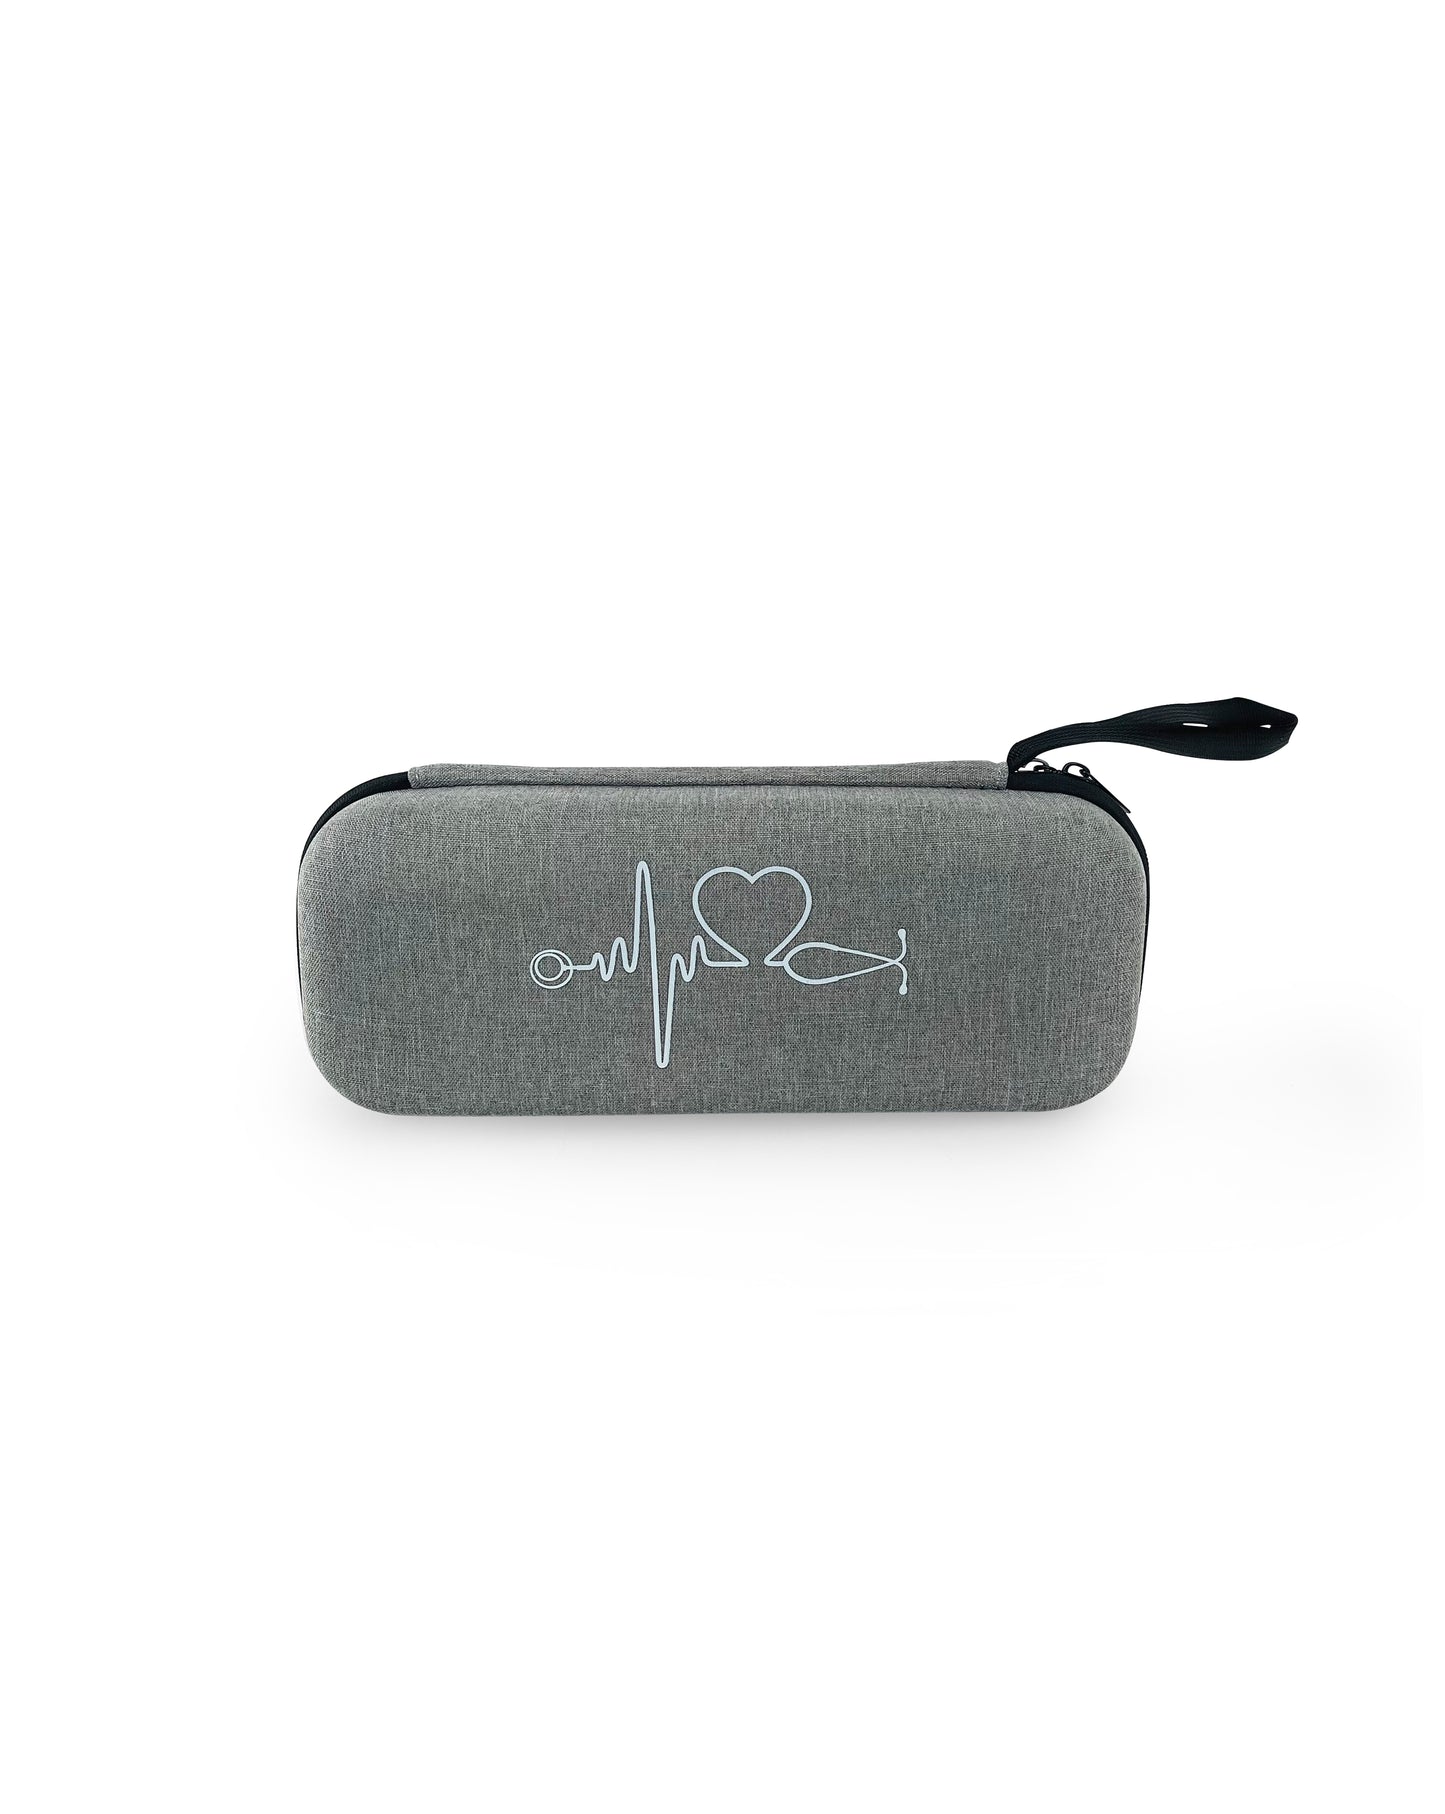 Stethoscope Carrying Case